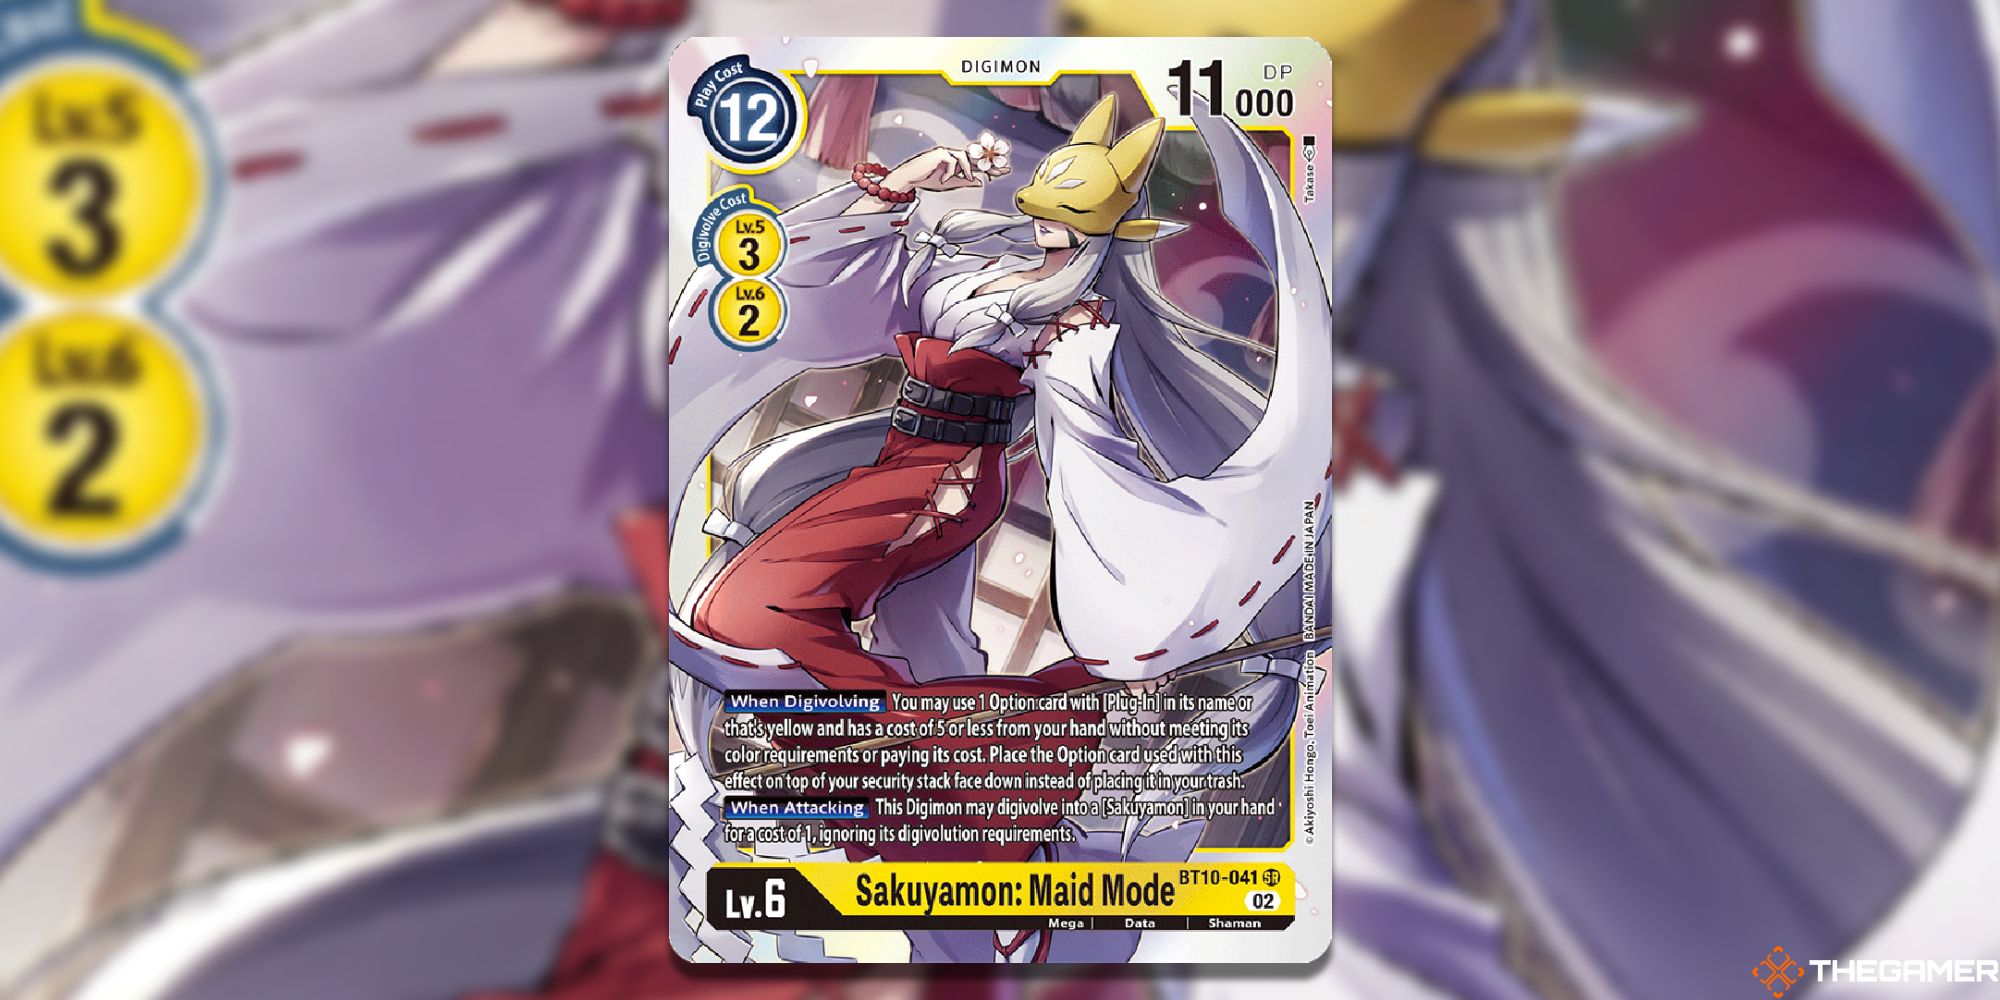 sakuyamon maid mode card from digimon card game with blur background